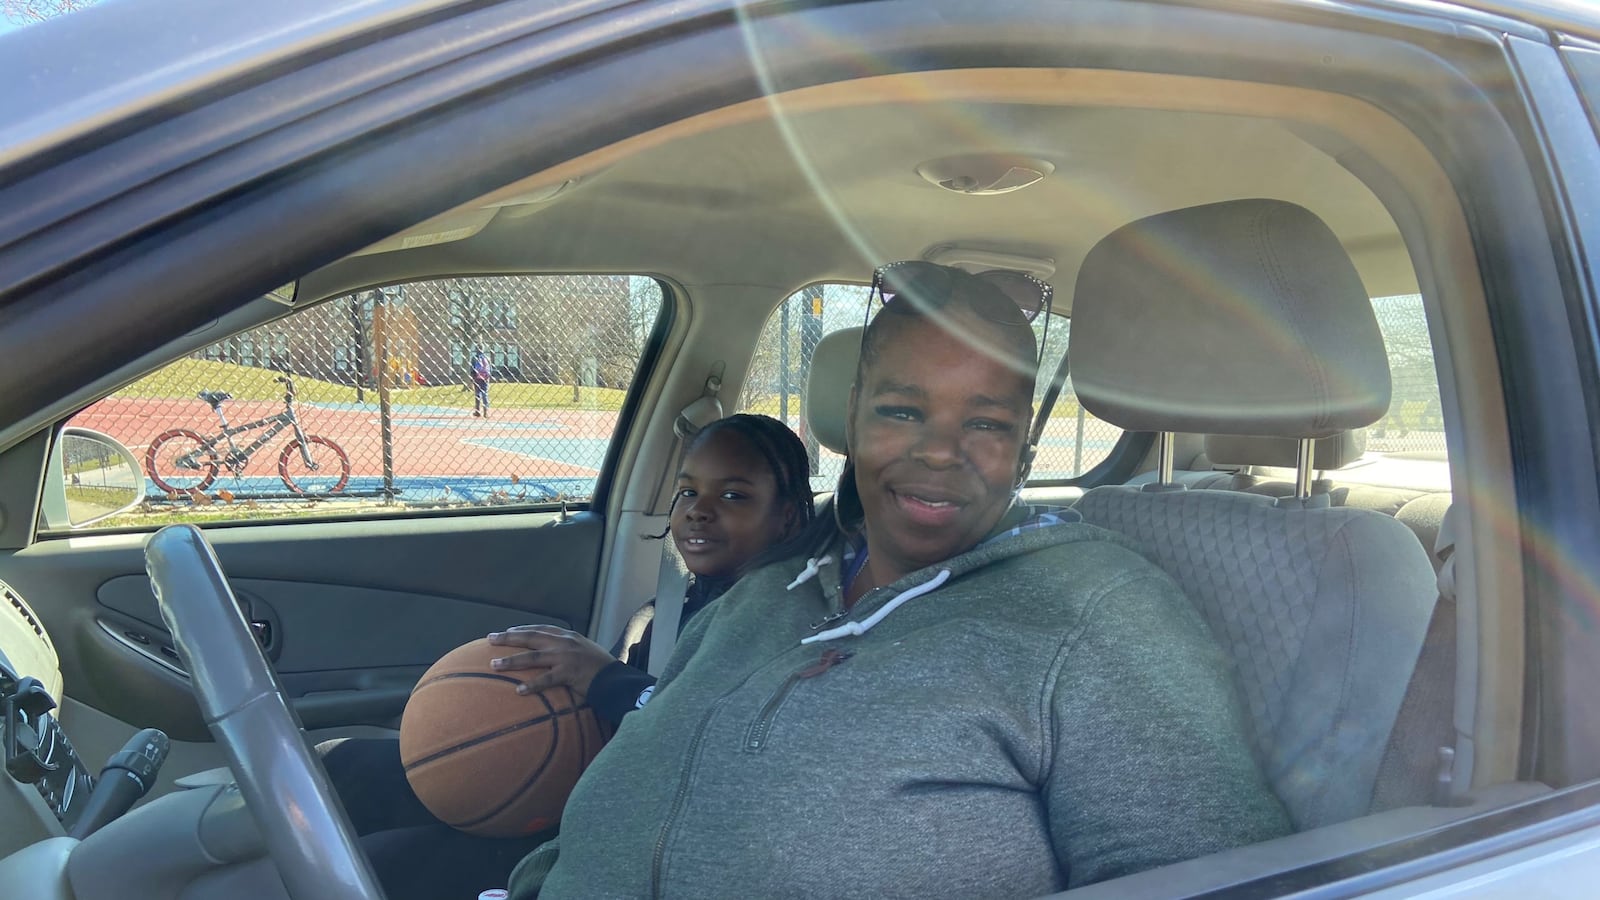 Shelly Franklin and her grandson stopped by a basketball court in Detroit on Friday afternoon. Schools across Michigan were closed to slow the spread of the coronavirus.